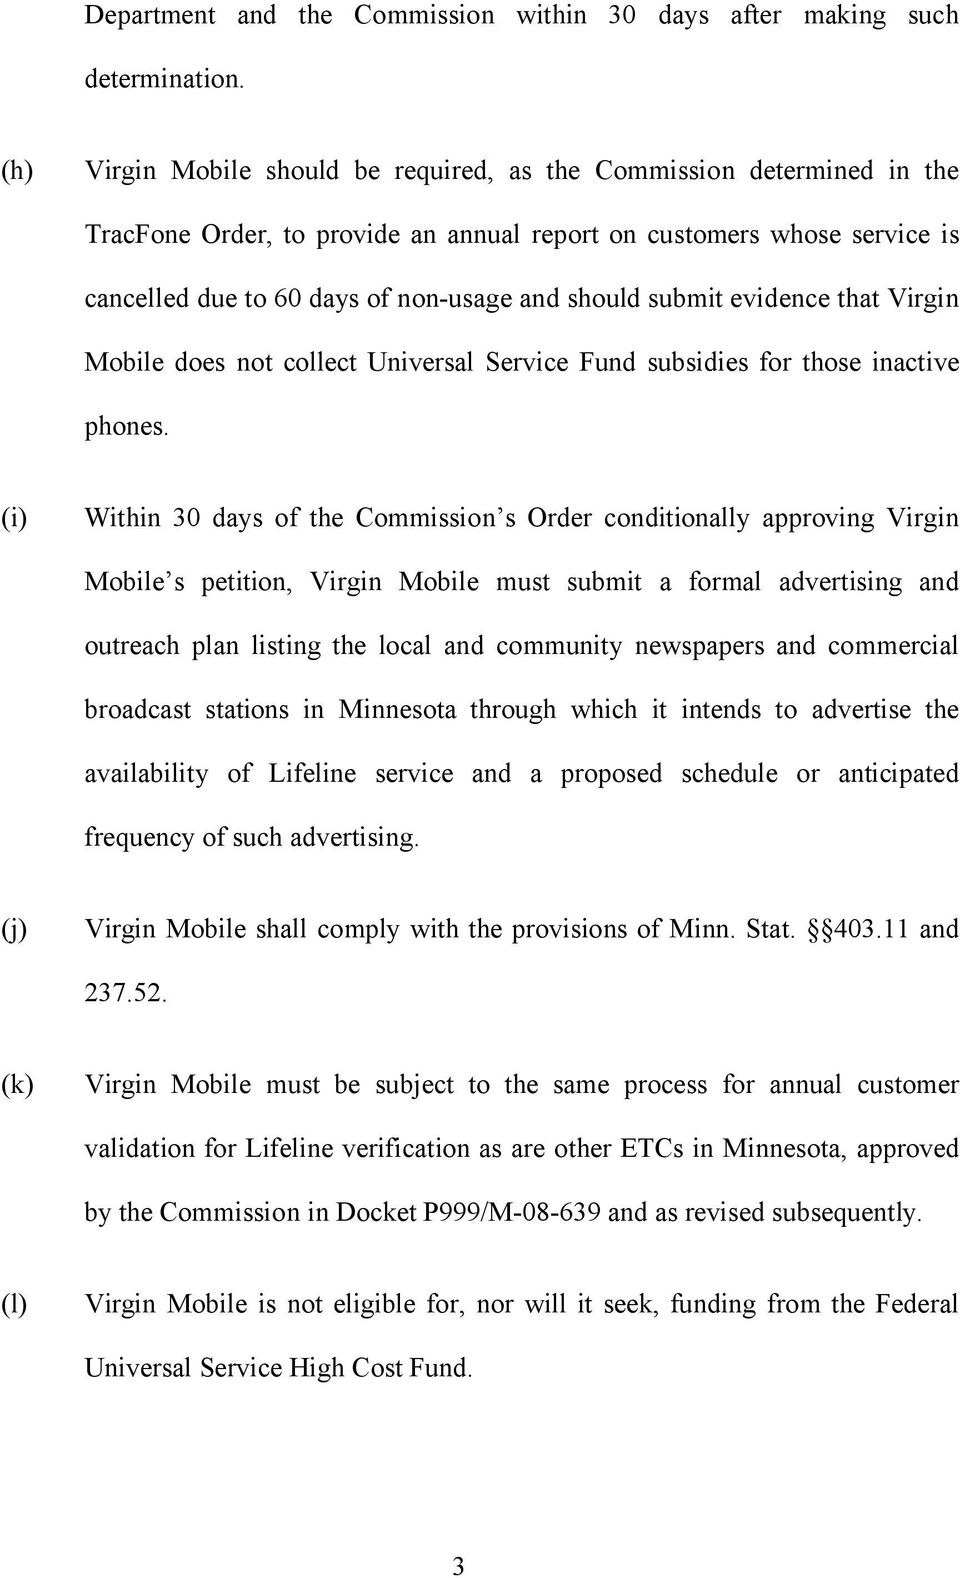 submit evidence that Virgin Mobile does not collect Universal Service Fund subsidies for those inactive phones.